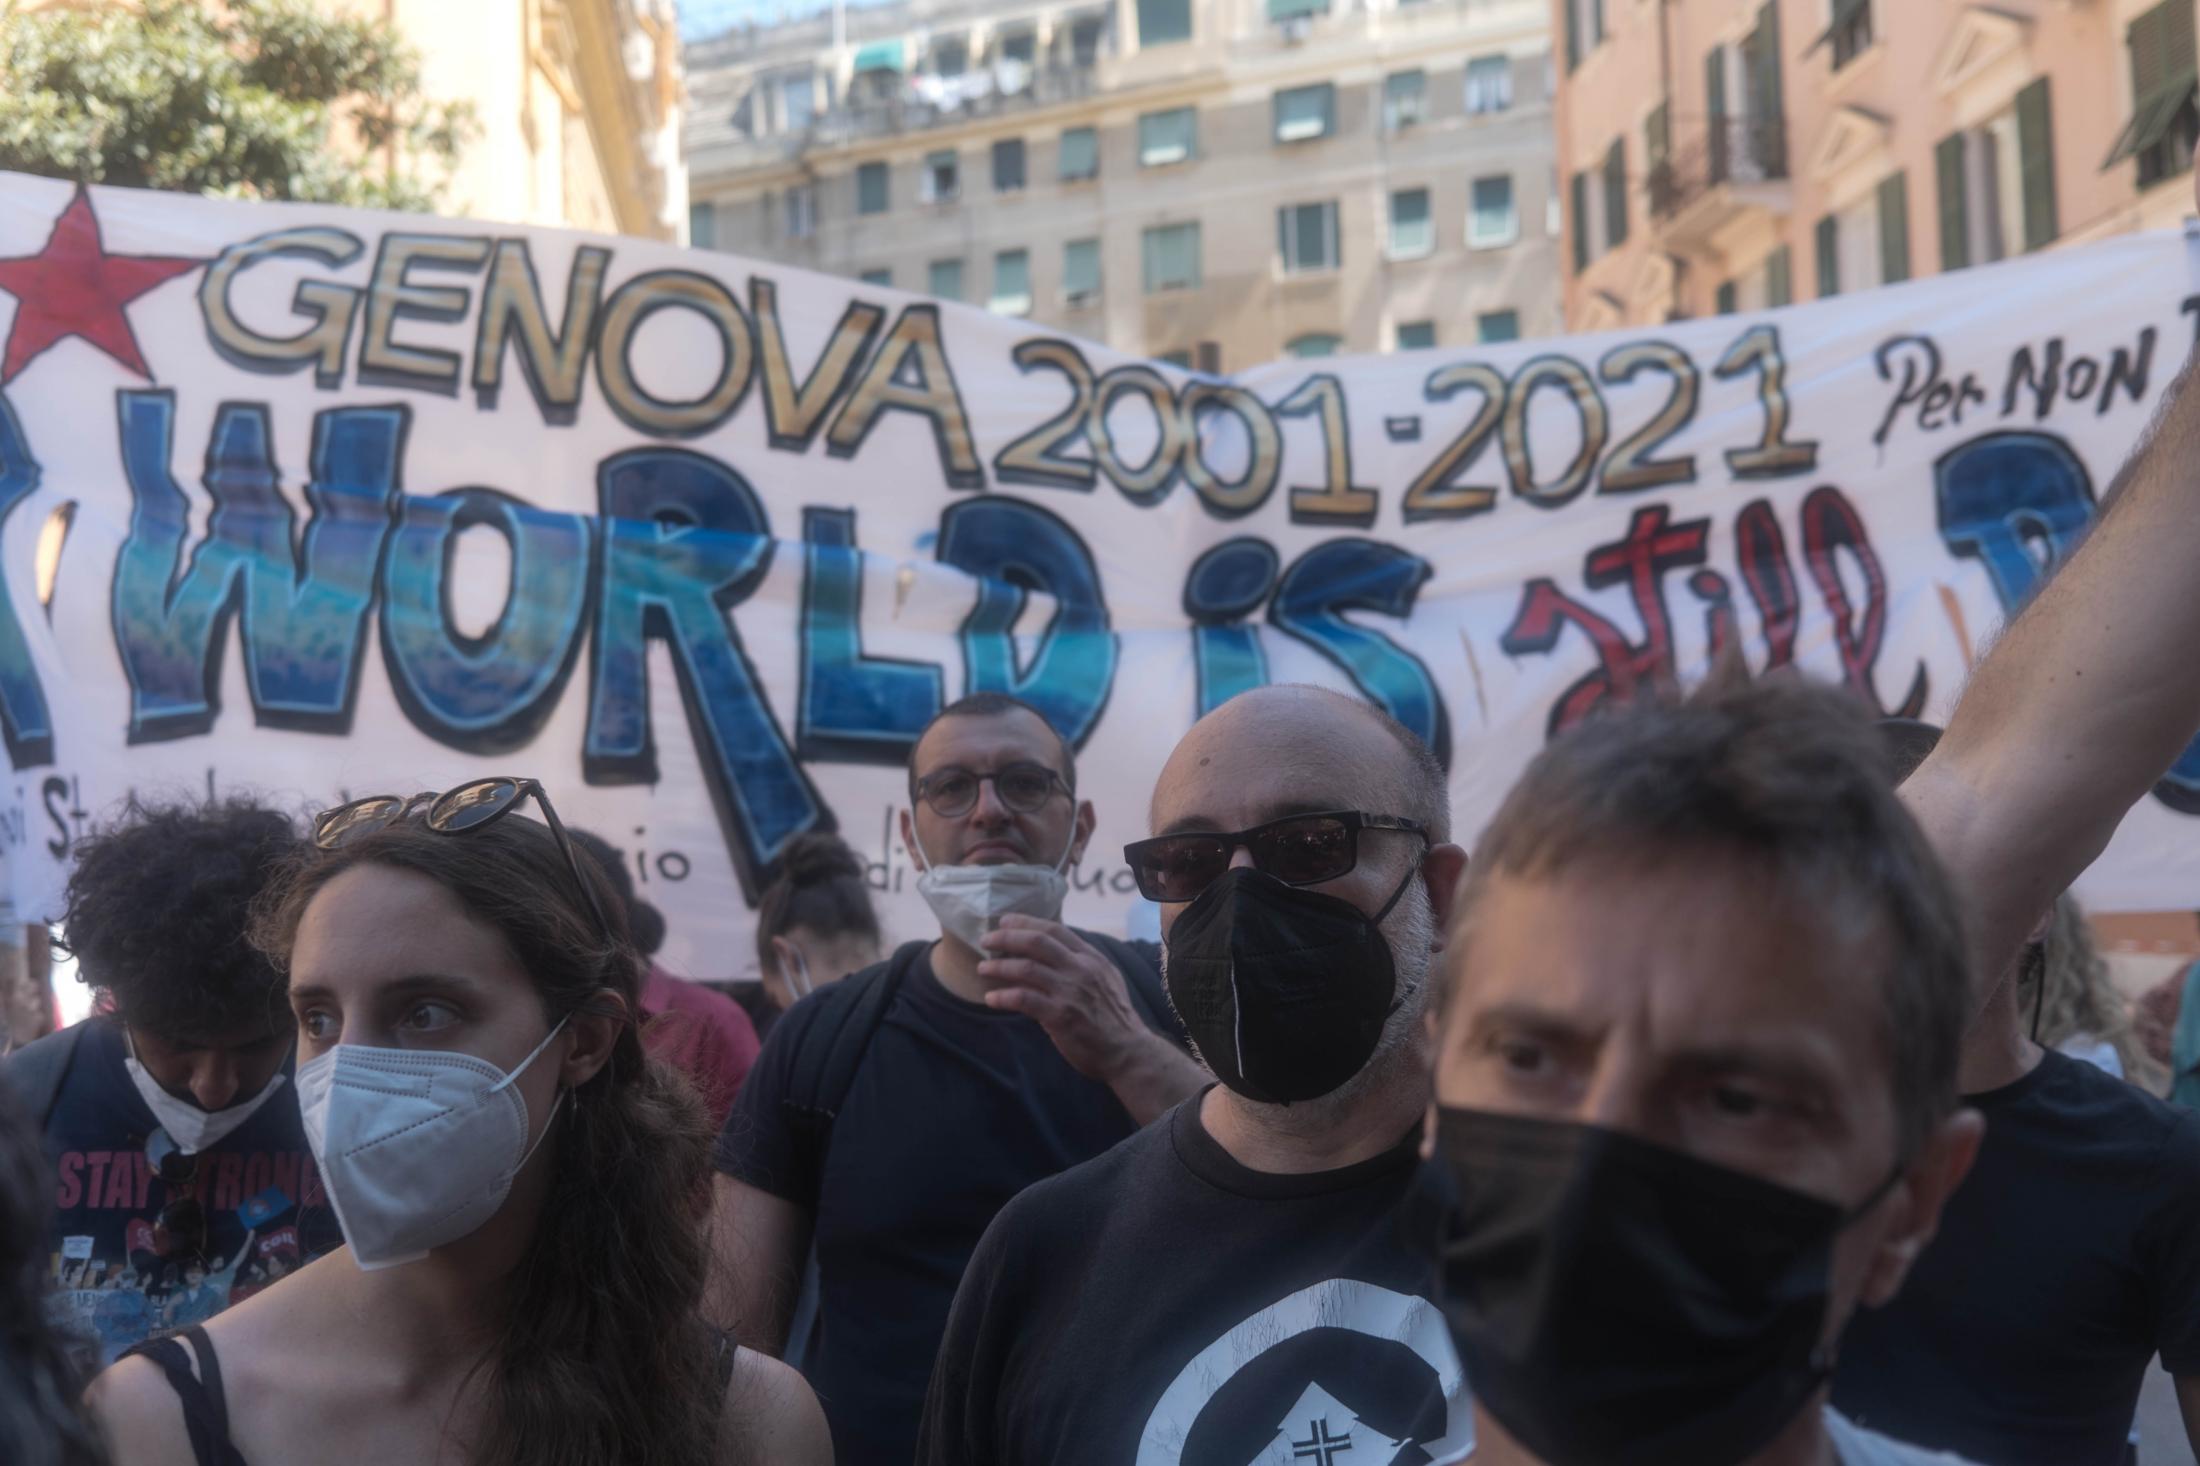 Genova 2001-2021: Another word is still Possible